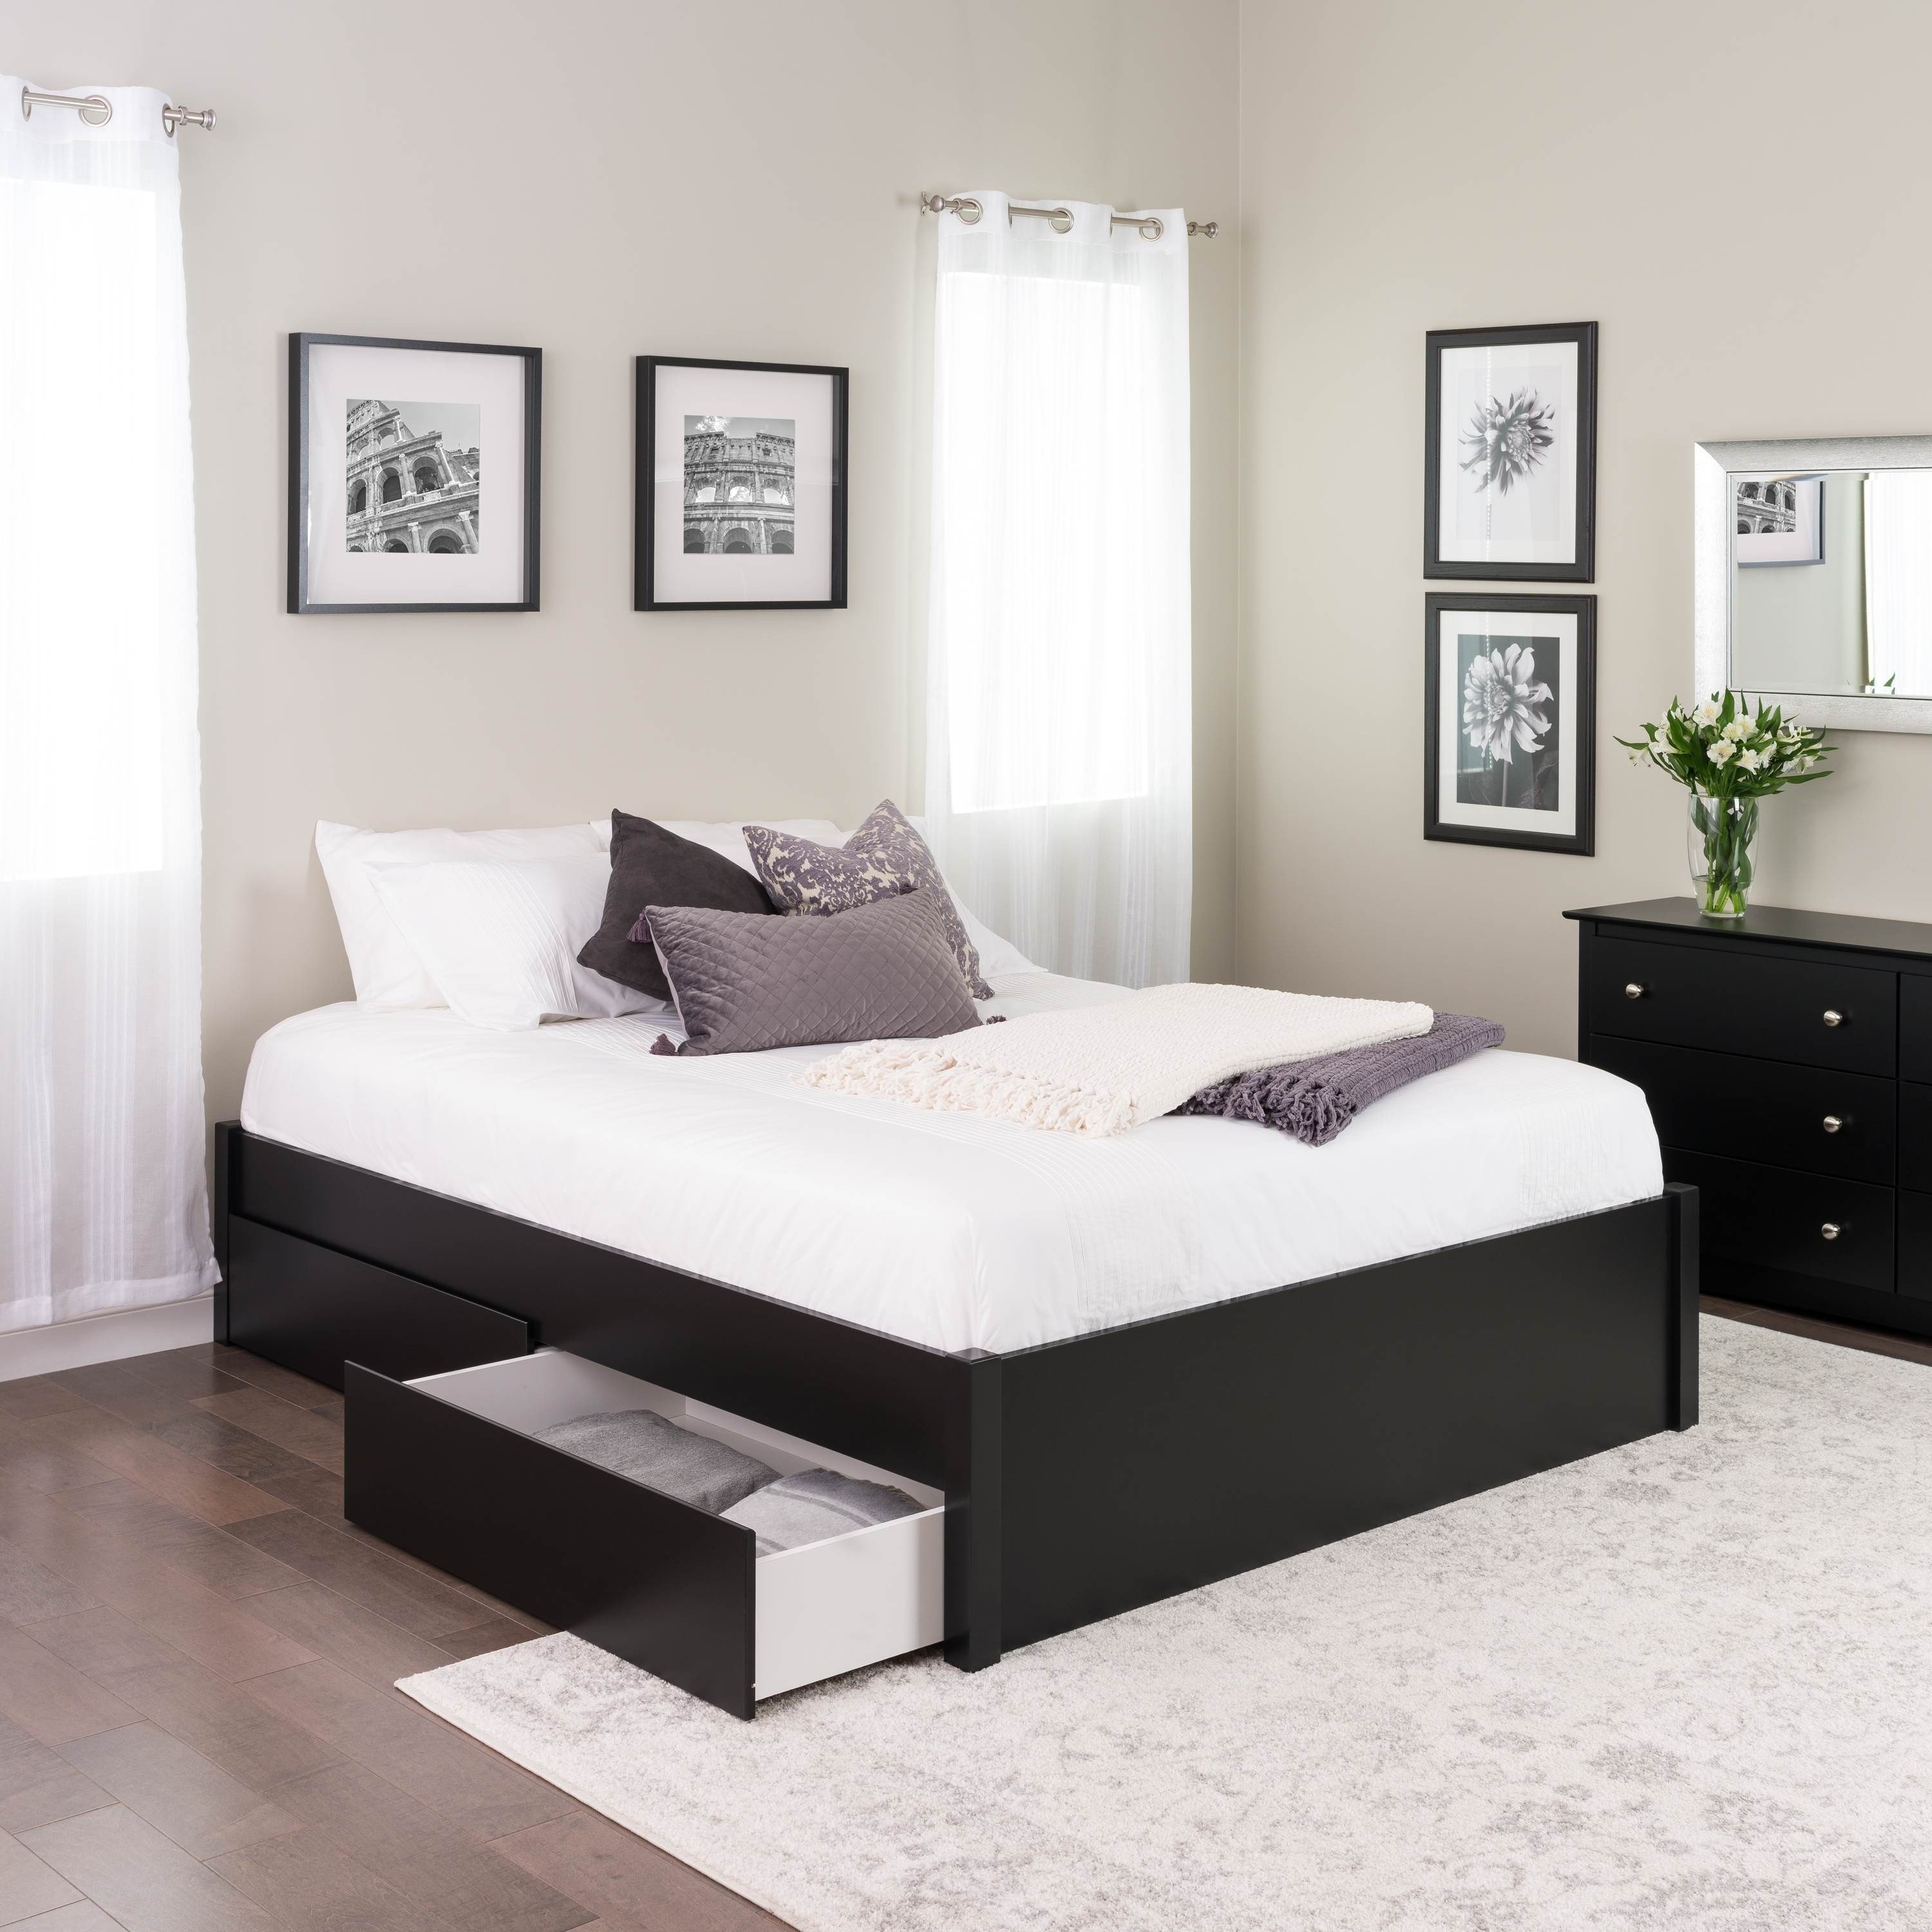 South Shore Bedroom Set Awesome Prepac Queen Select 4 Post Platform Bed with Optional Drawers